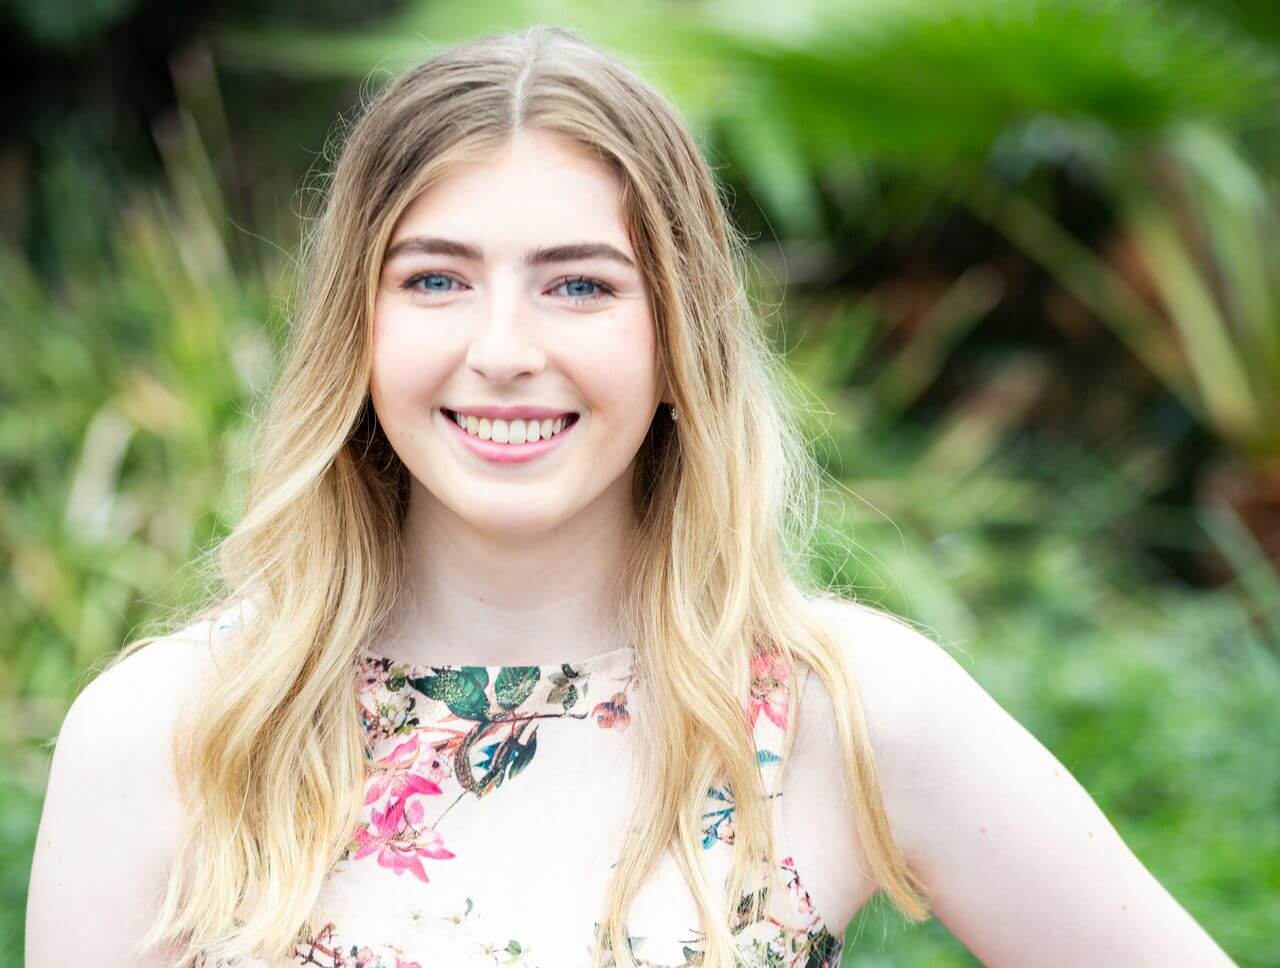 Exclusive: Neighbours star Georgie Stone discovered show axe news on Twitter